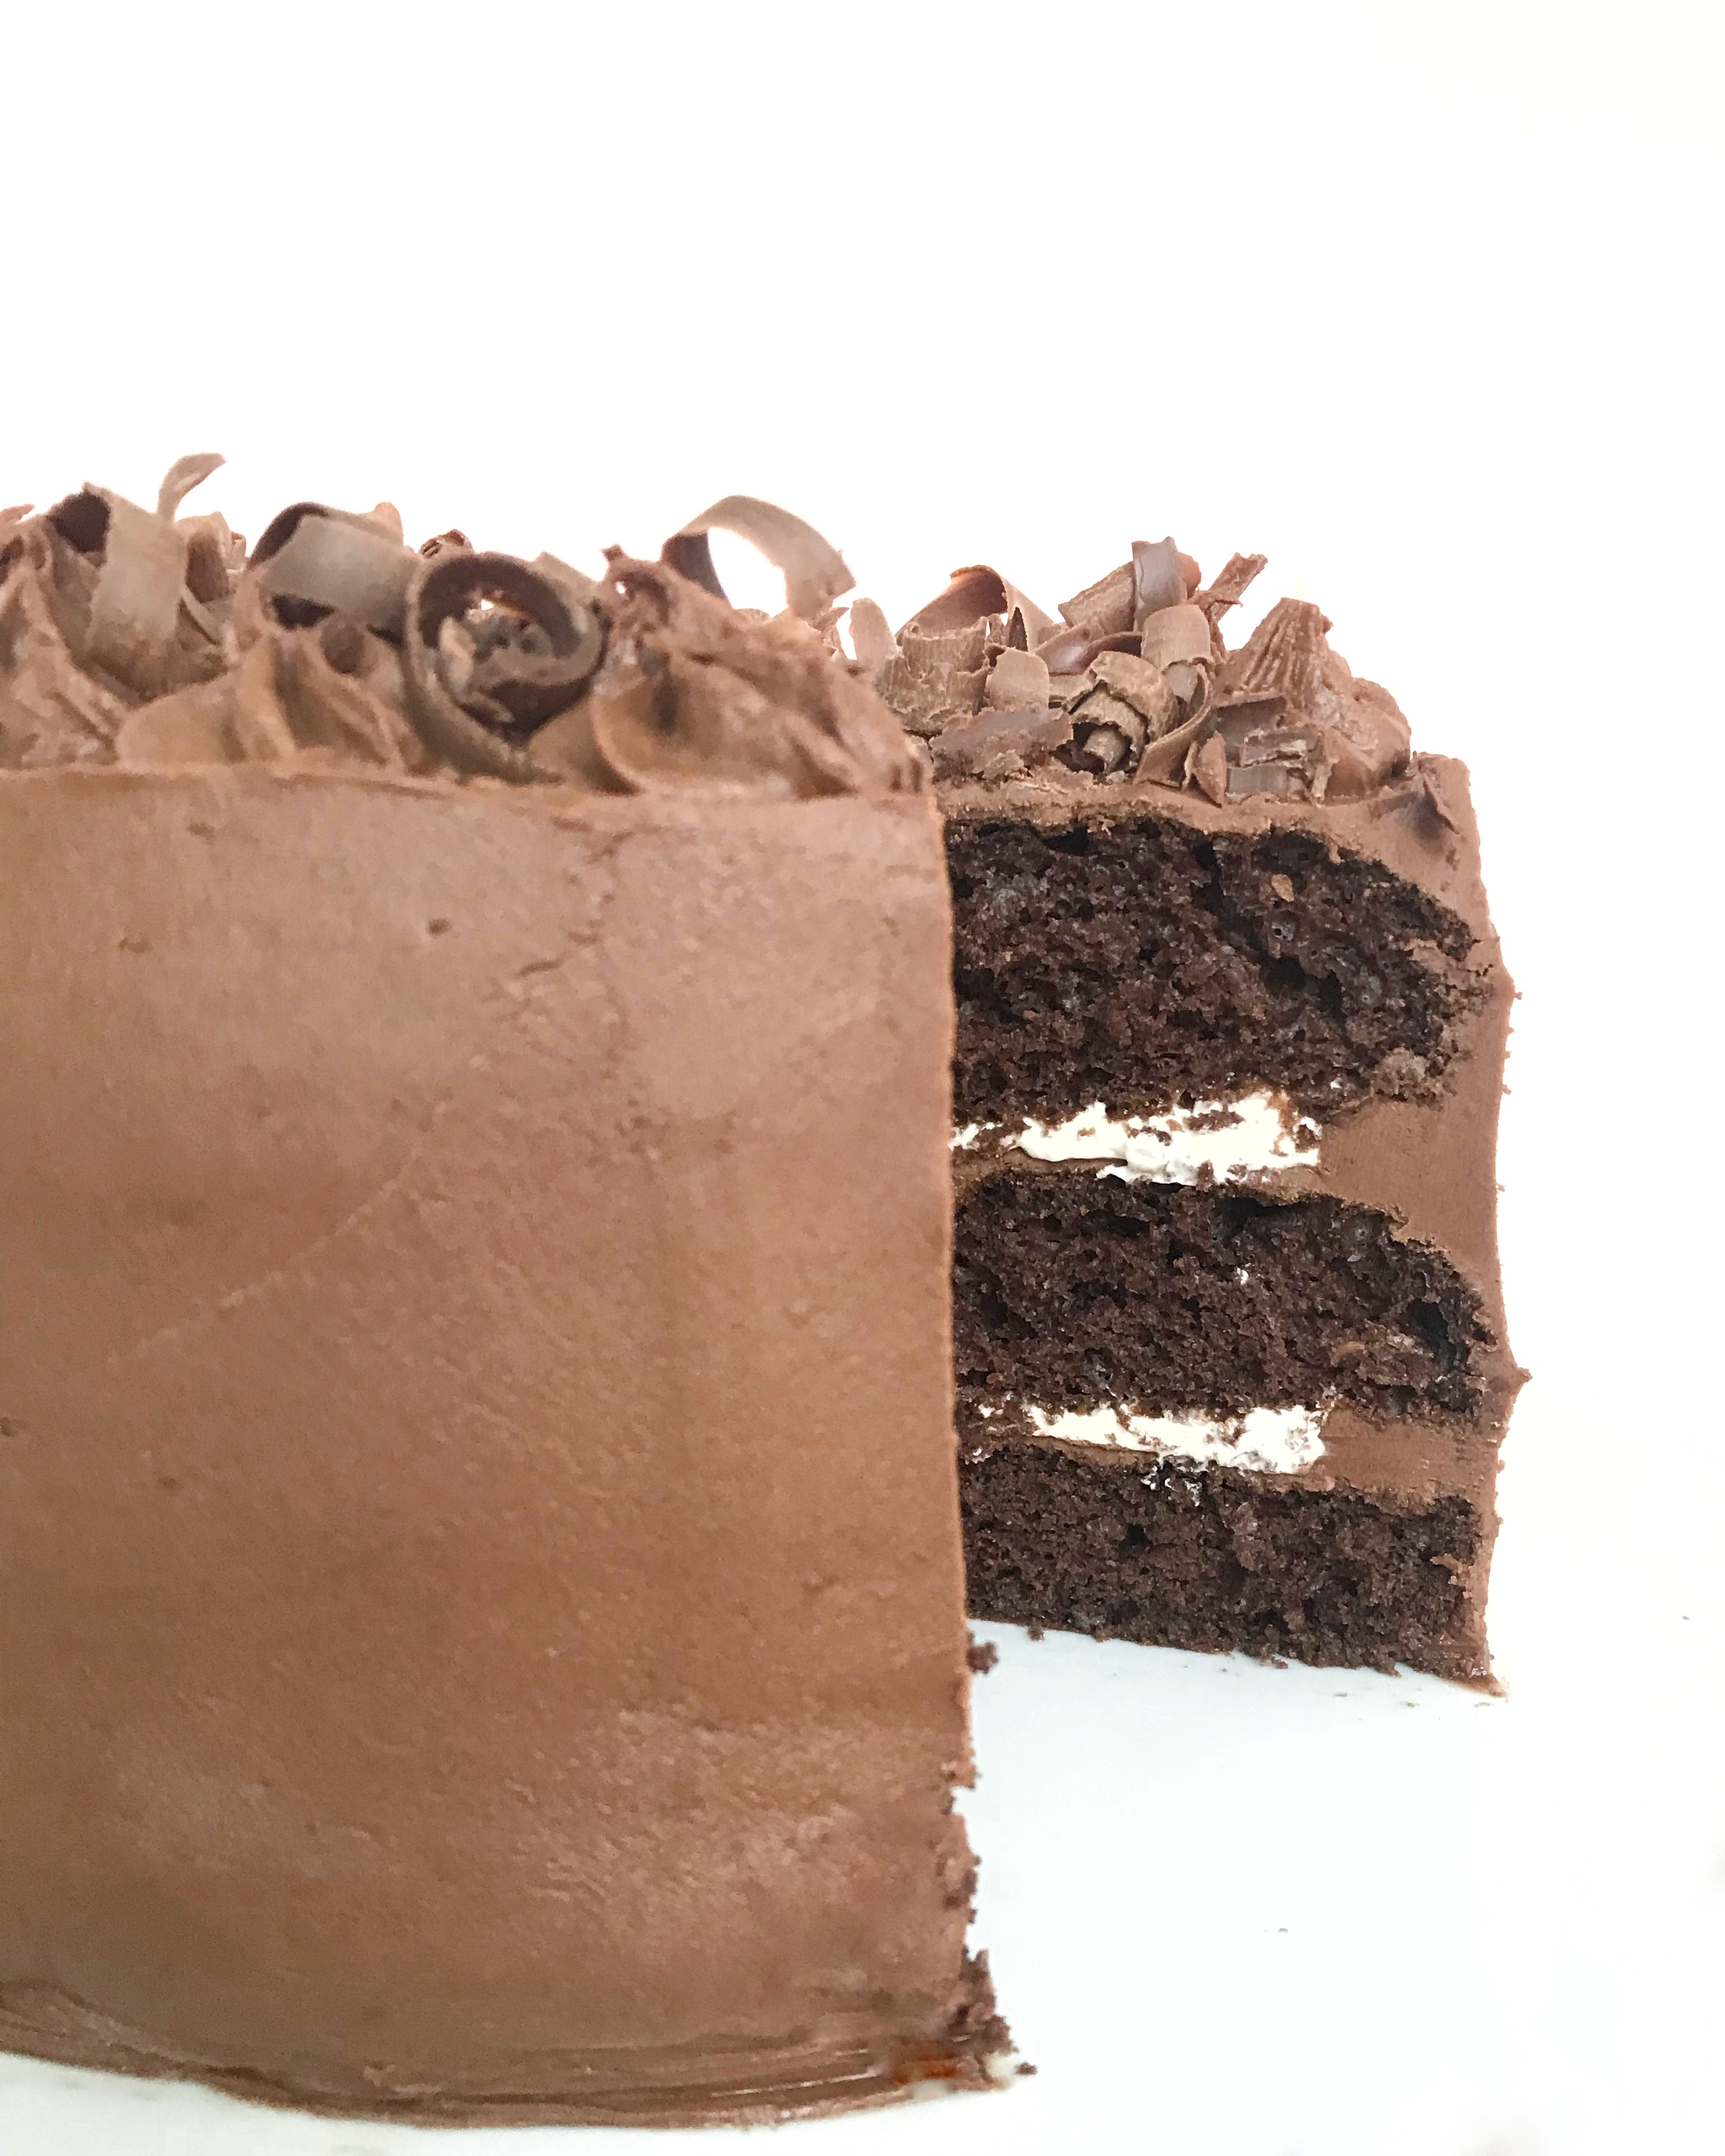 perfect chocolate cake spread with chocolate fudge frosting